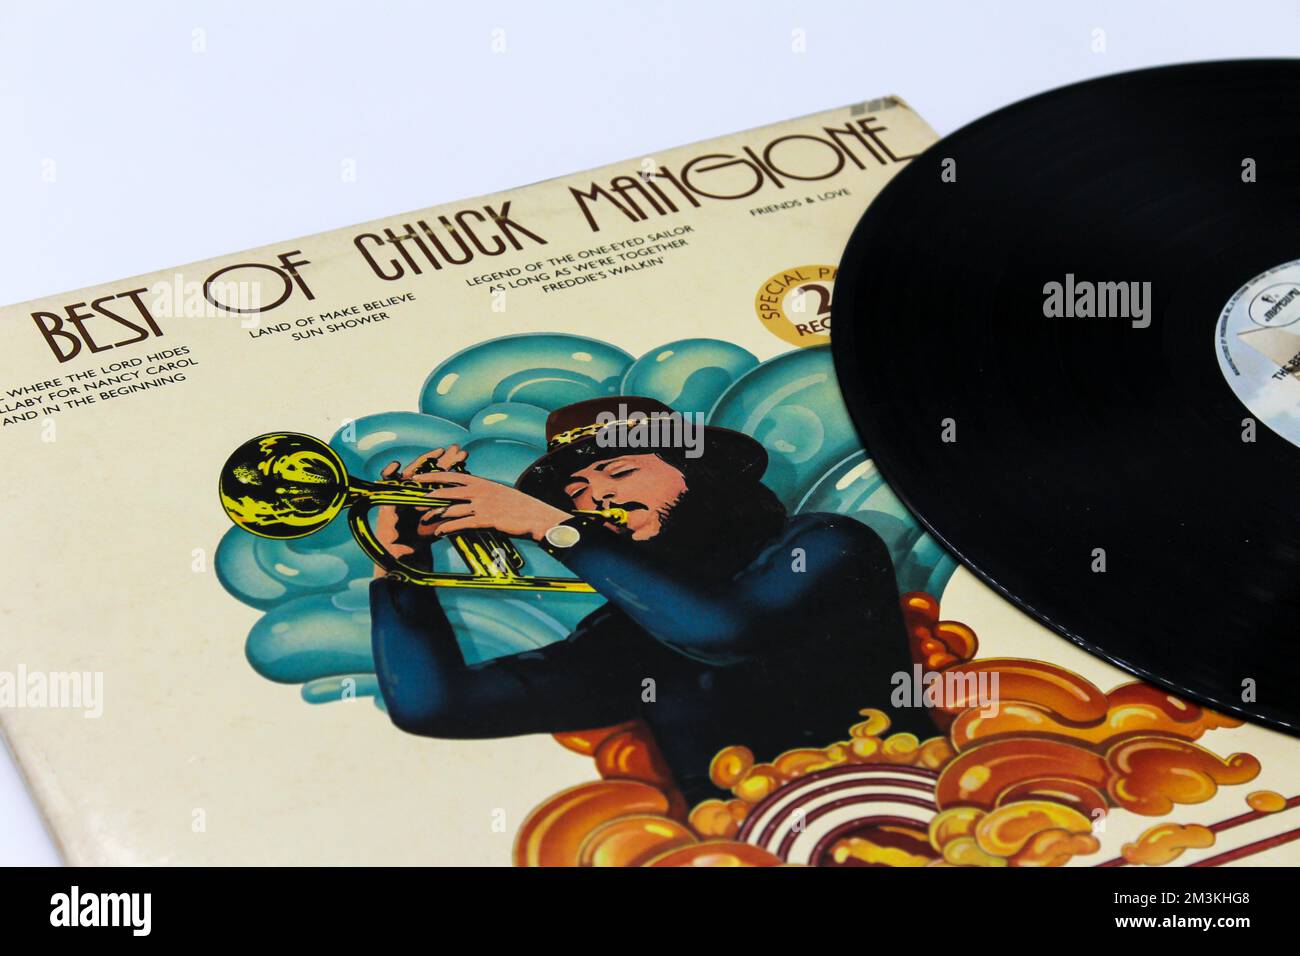 Charles Frank Mangione is an American flugelhorn player, voice actor, trumpeter and composer. Record LP disc titled The Best of Chuck Mangione. Album Stock Photo